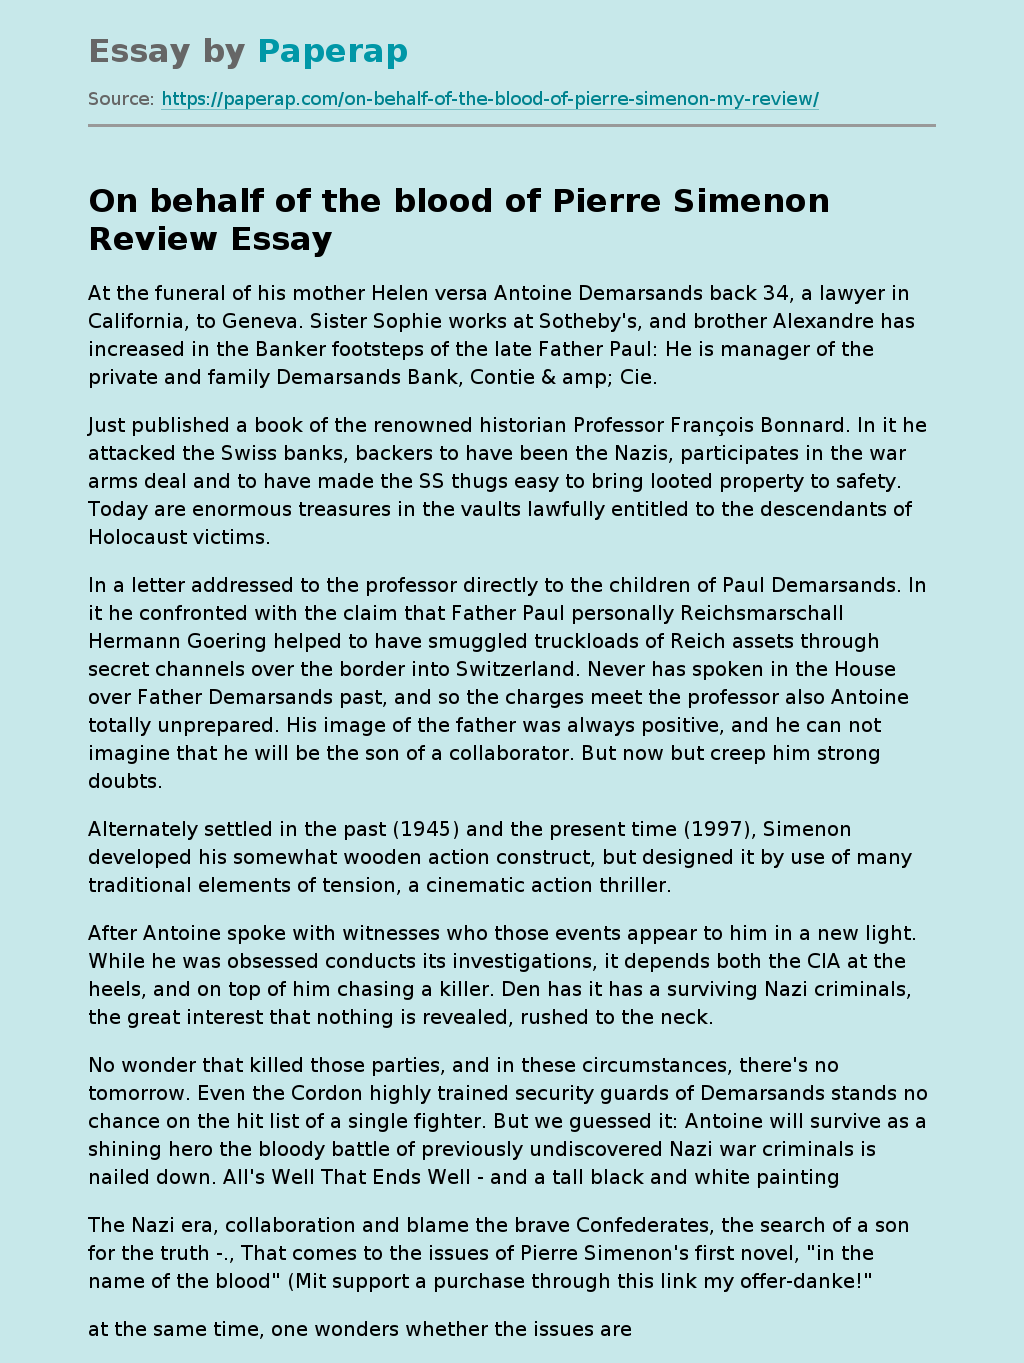 On Behalf Of The Blood Of Pierre Simenon Review